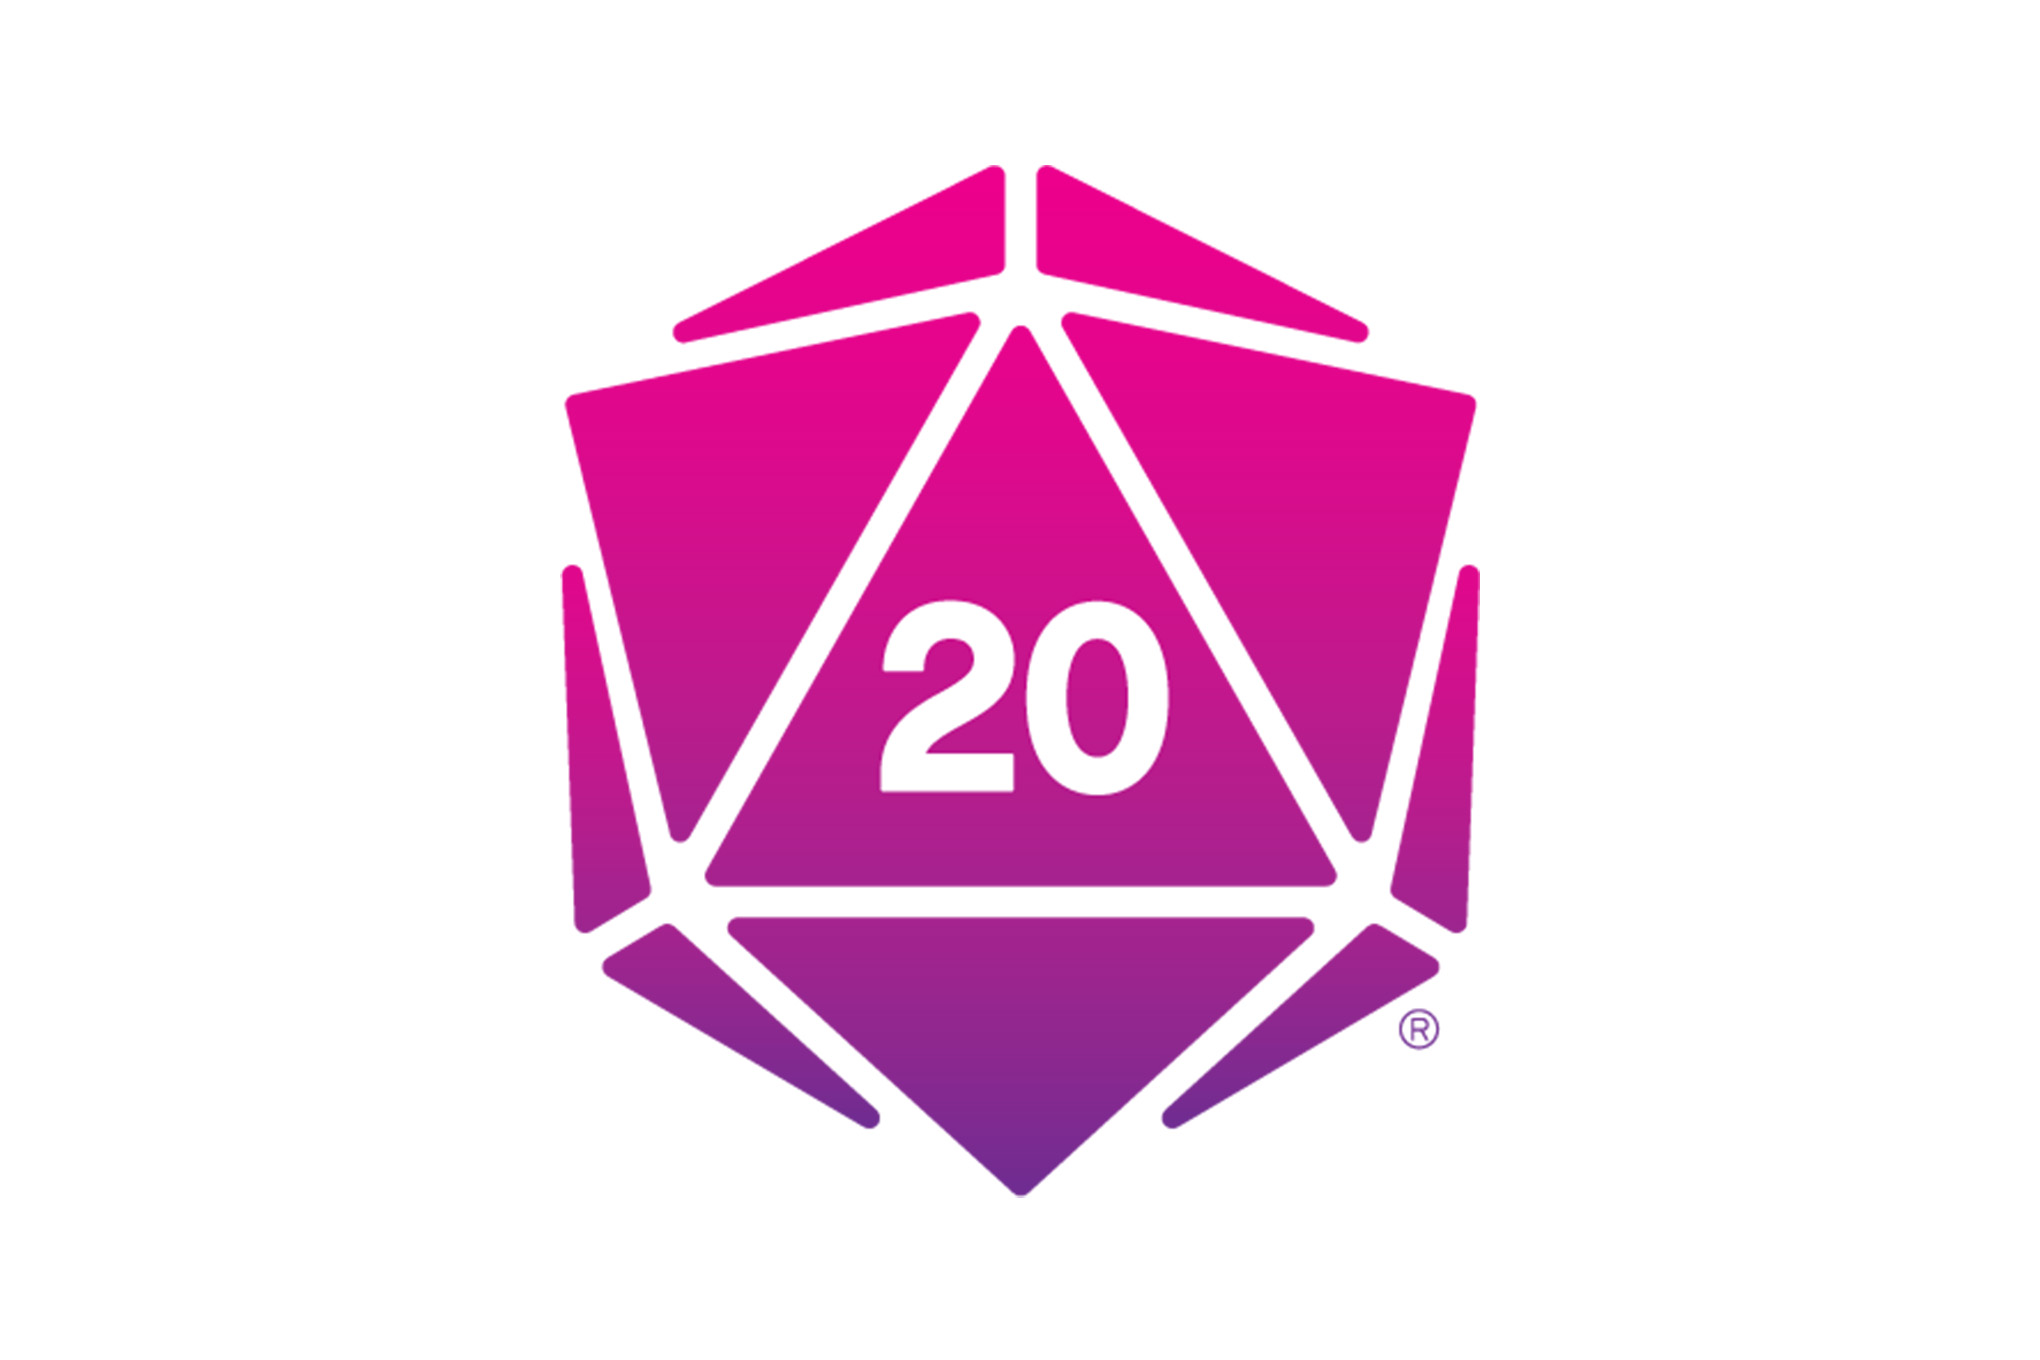 The Roll20 logo, being an oversized d20 in pink and purple.